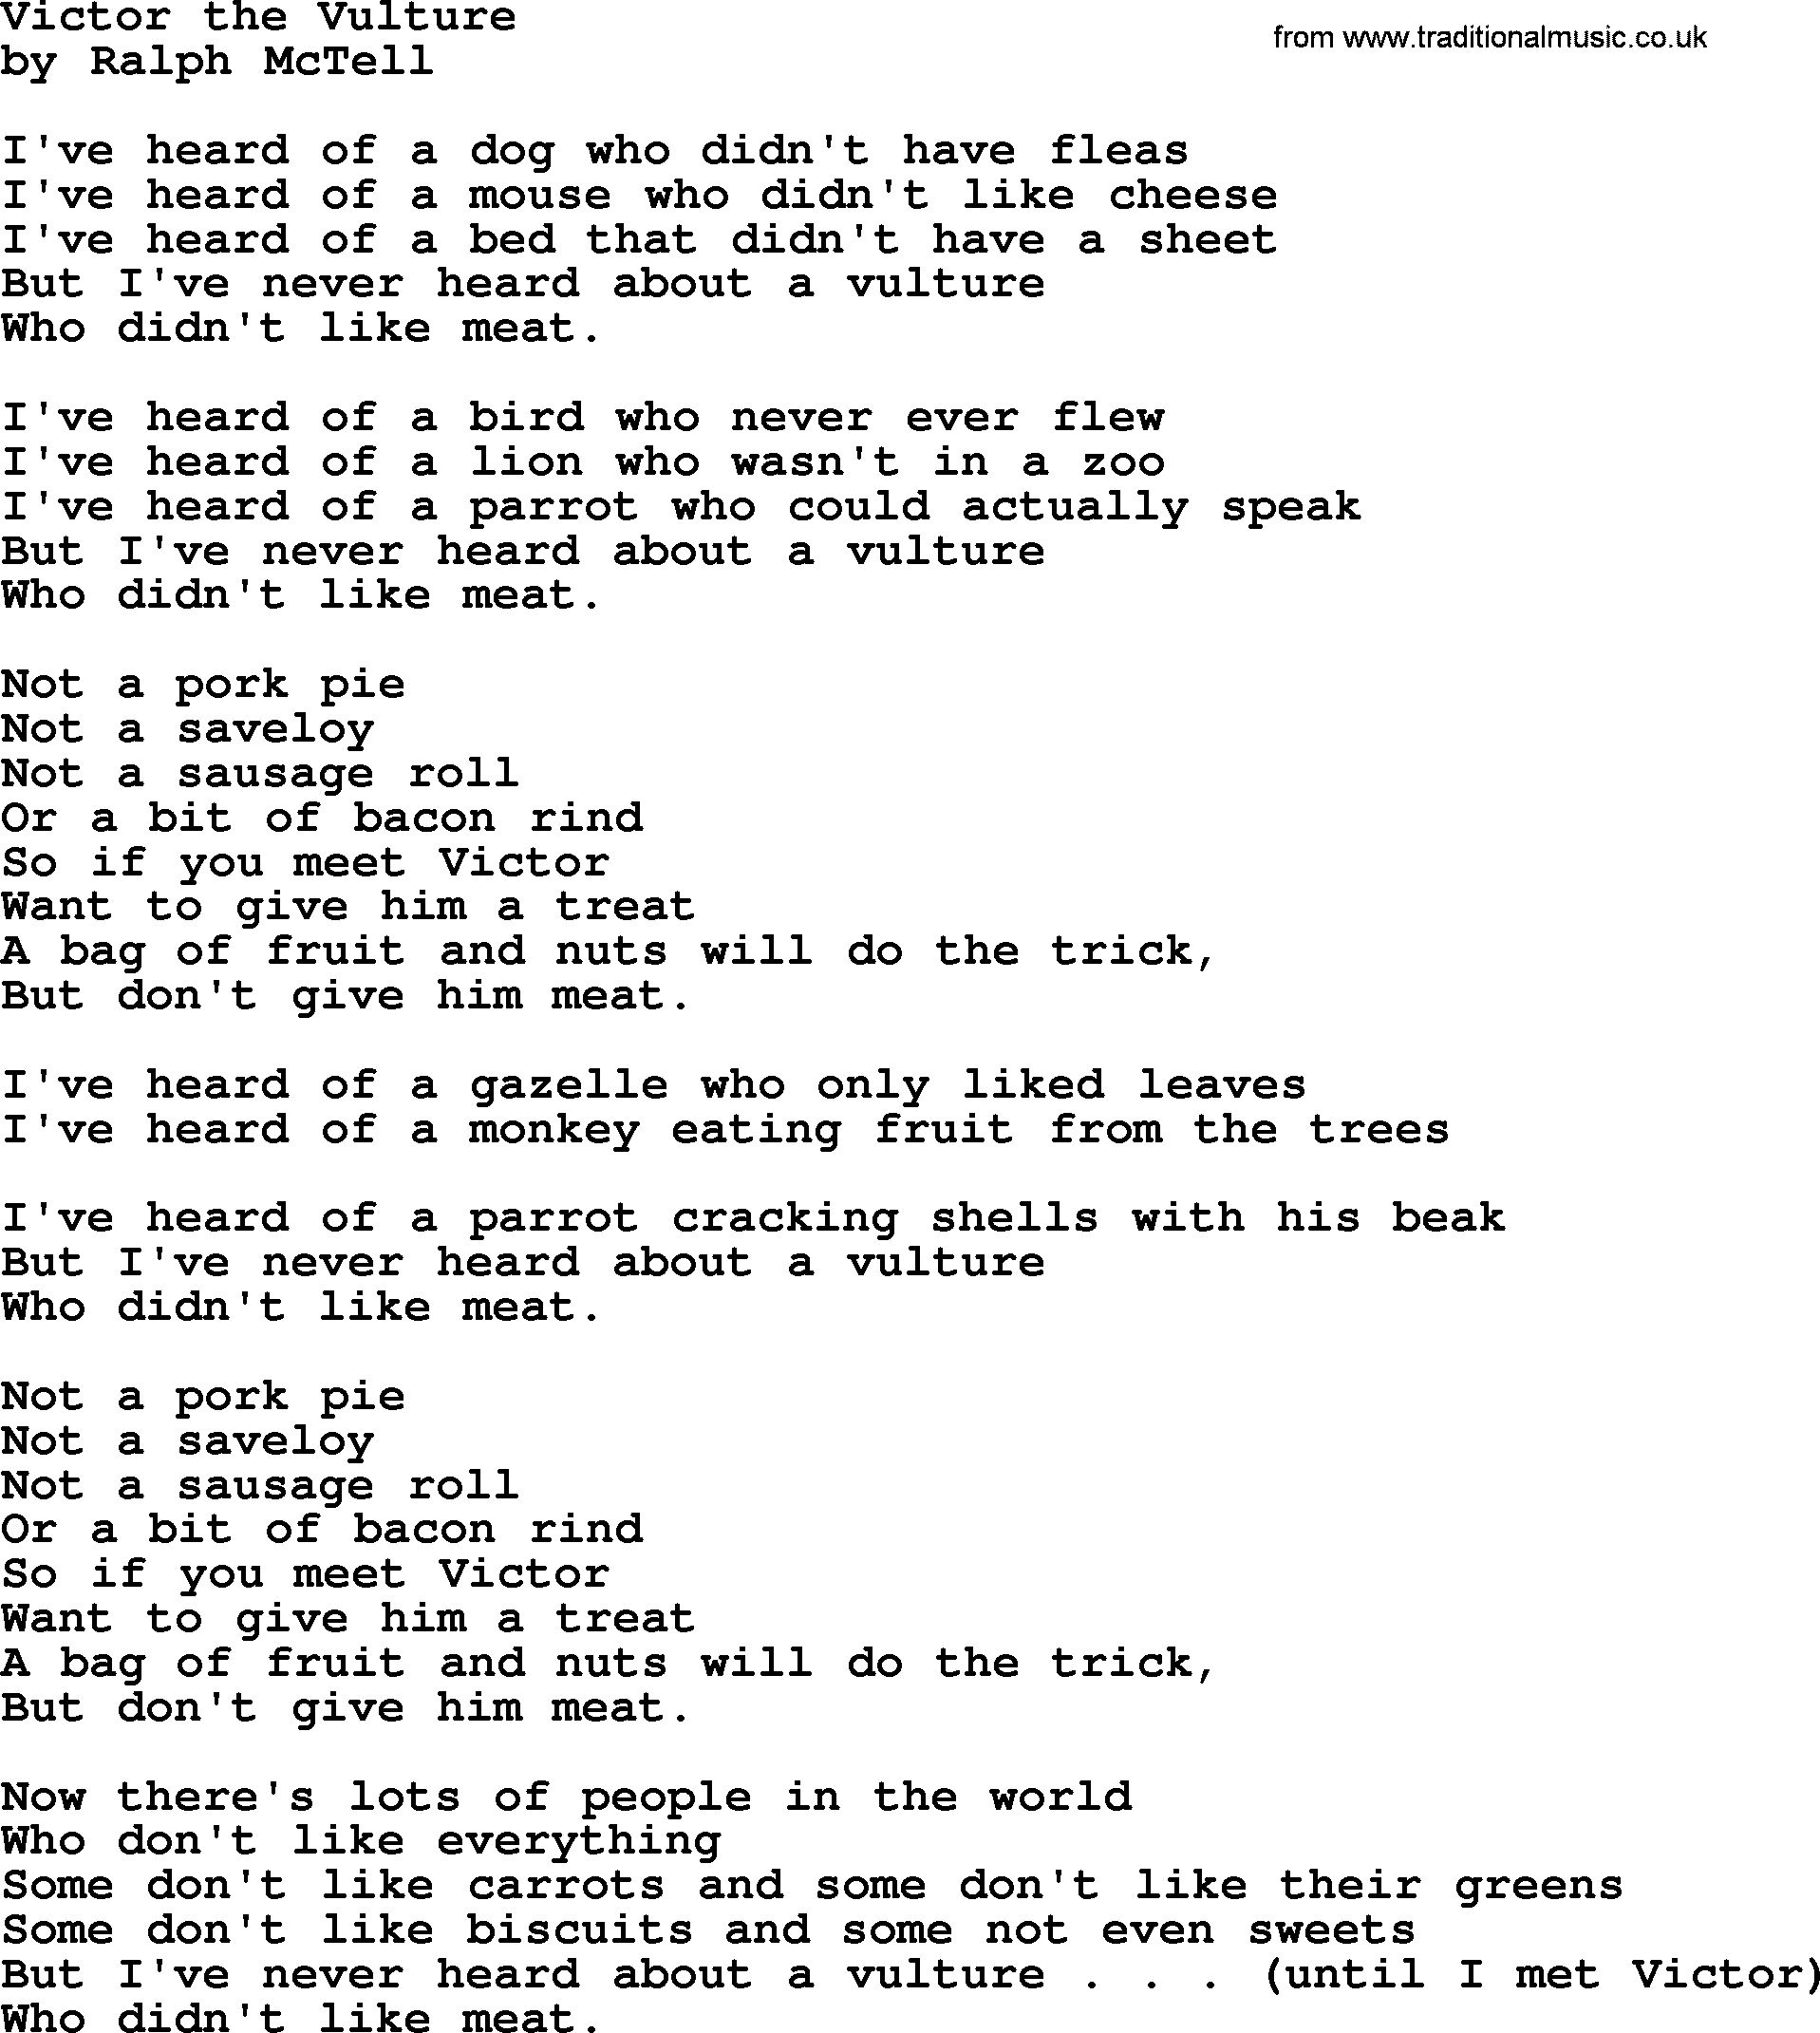 Ralph McTell Song: Victor The Vulture, lyrics